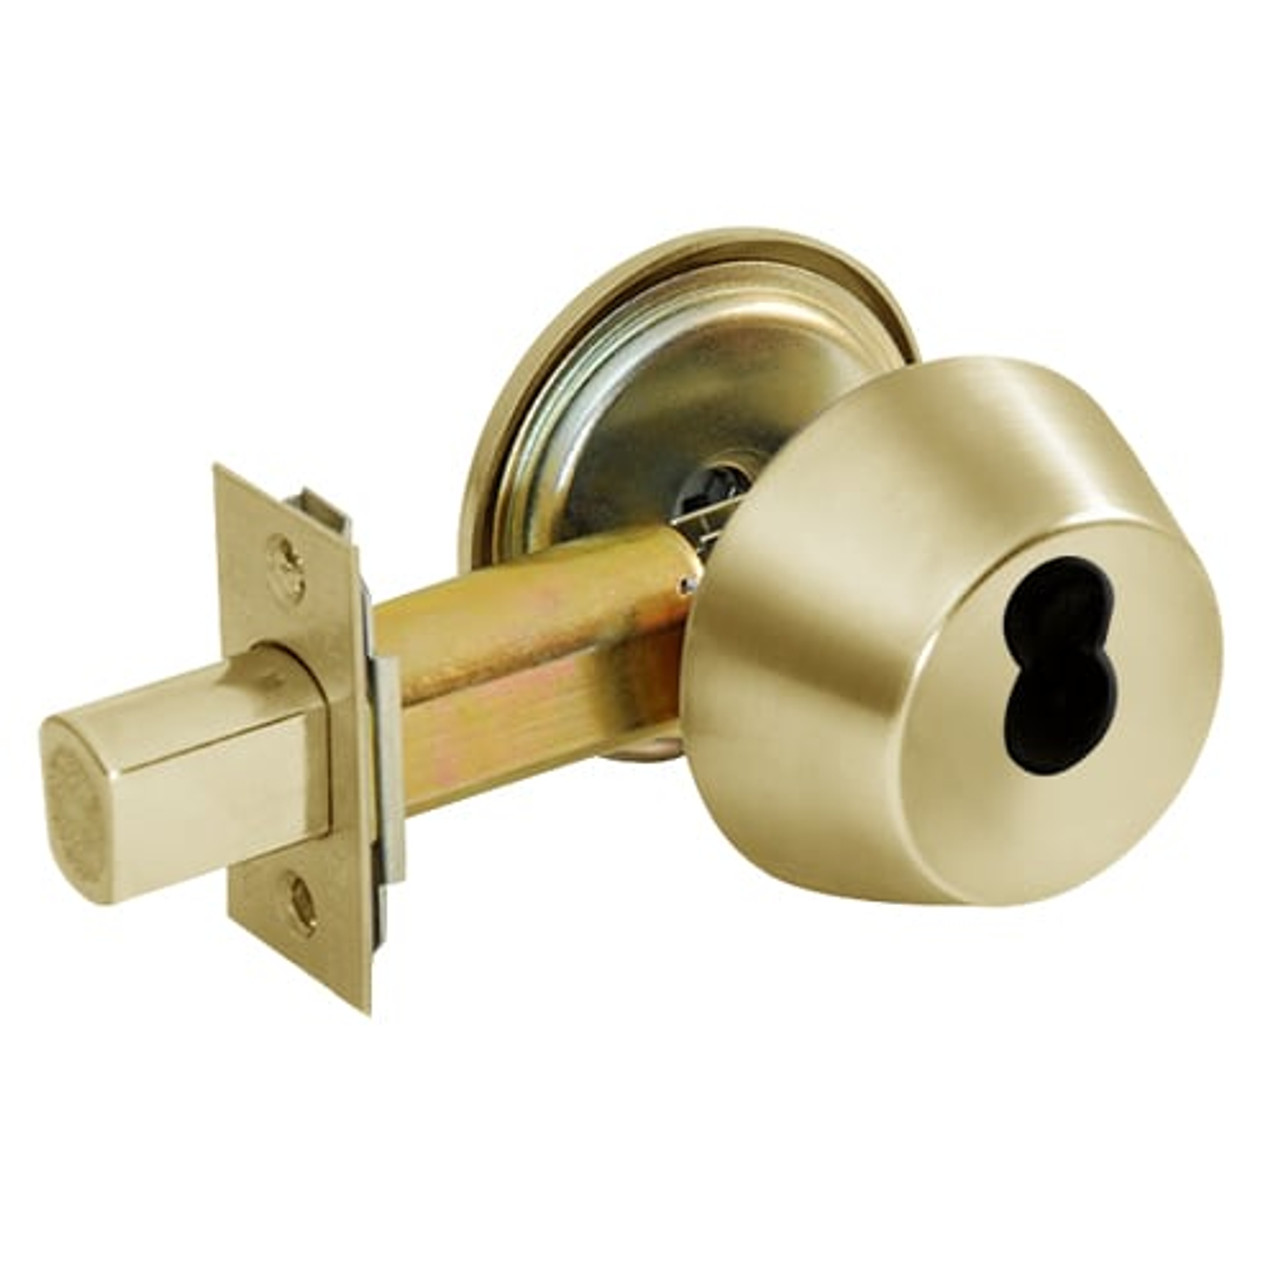 DL2211-606-CL6 Corbin DL2200 Series IC 6-Pin Less Core Cylindrical Deadlocks with Single Cylinder w/ Blank Plate in Satin Brass Finish